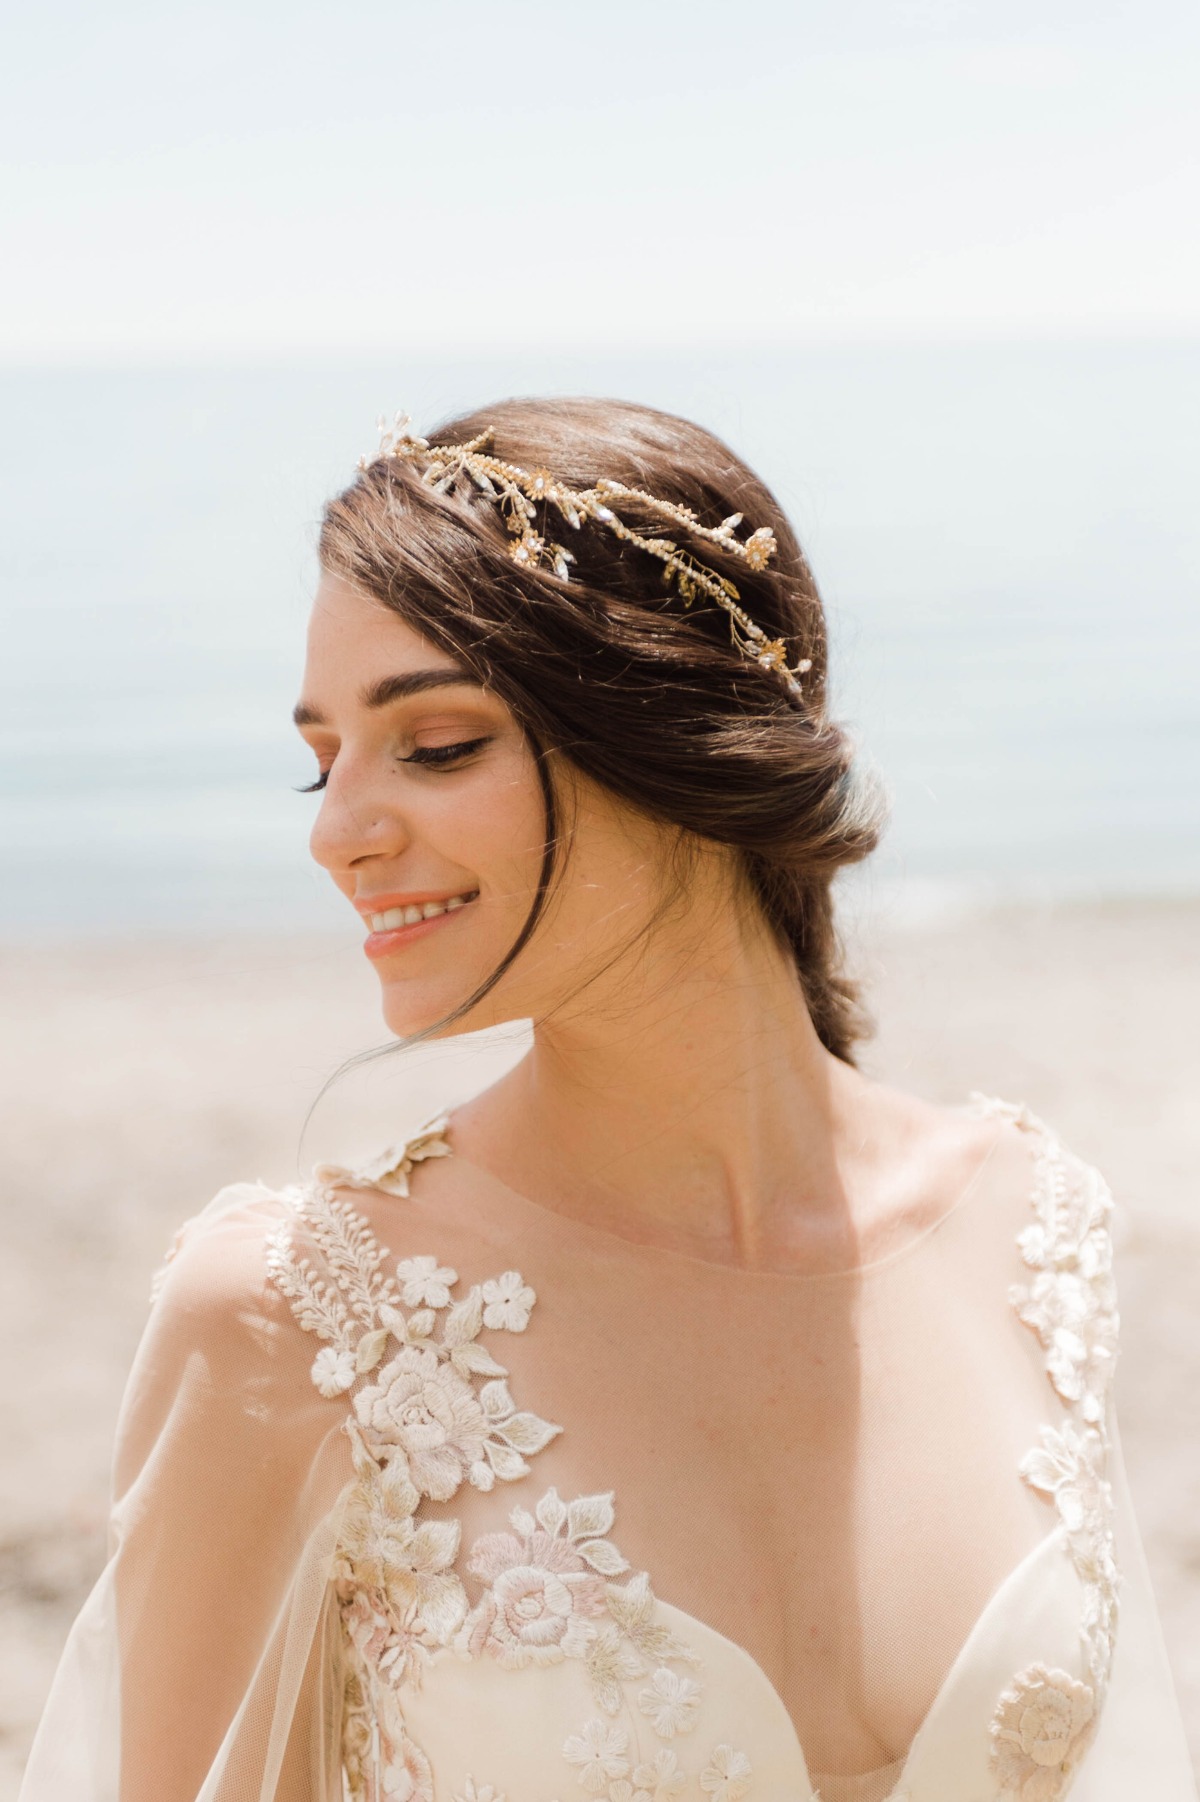 ethereal wedding dress and accessories